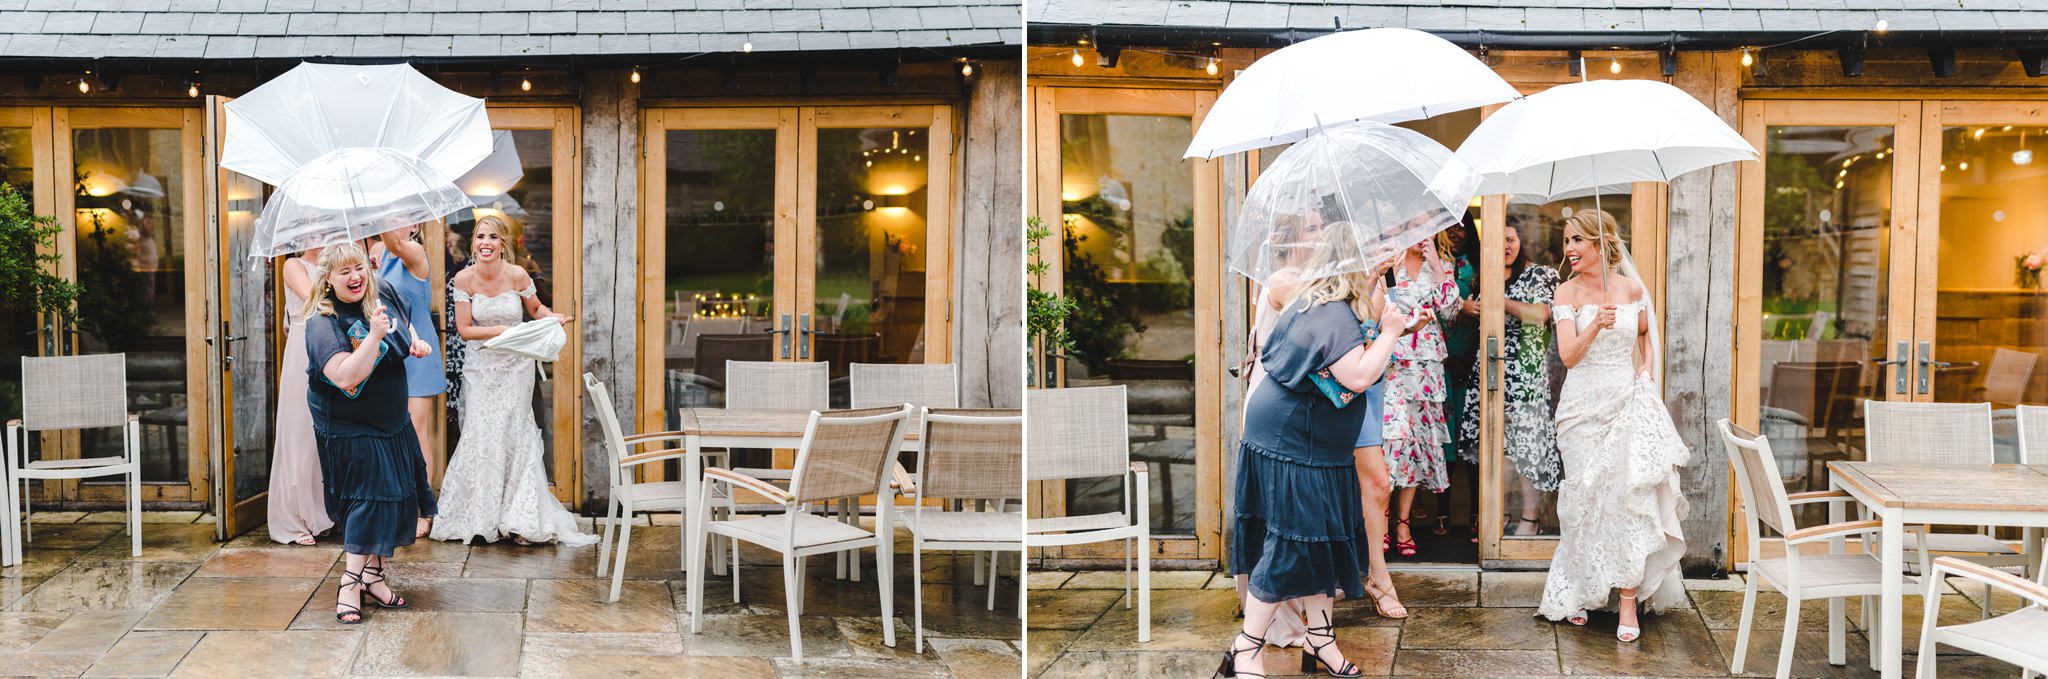 Fun candid photography at Upcote Barn in The Cotswolds